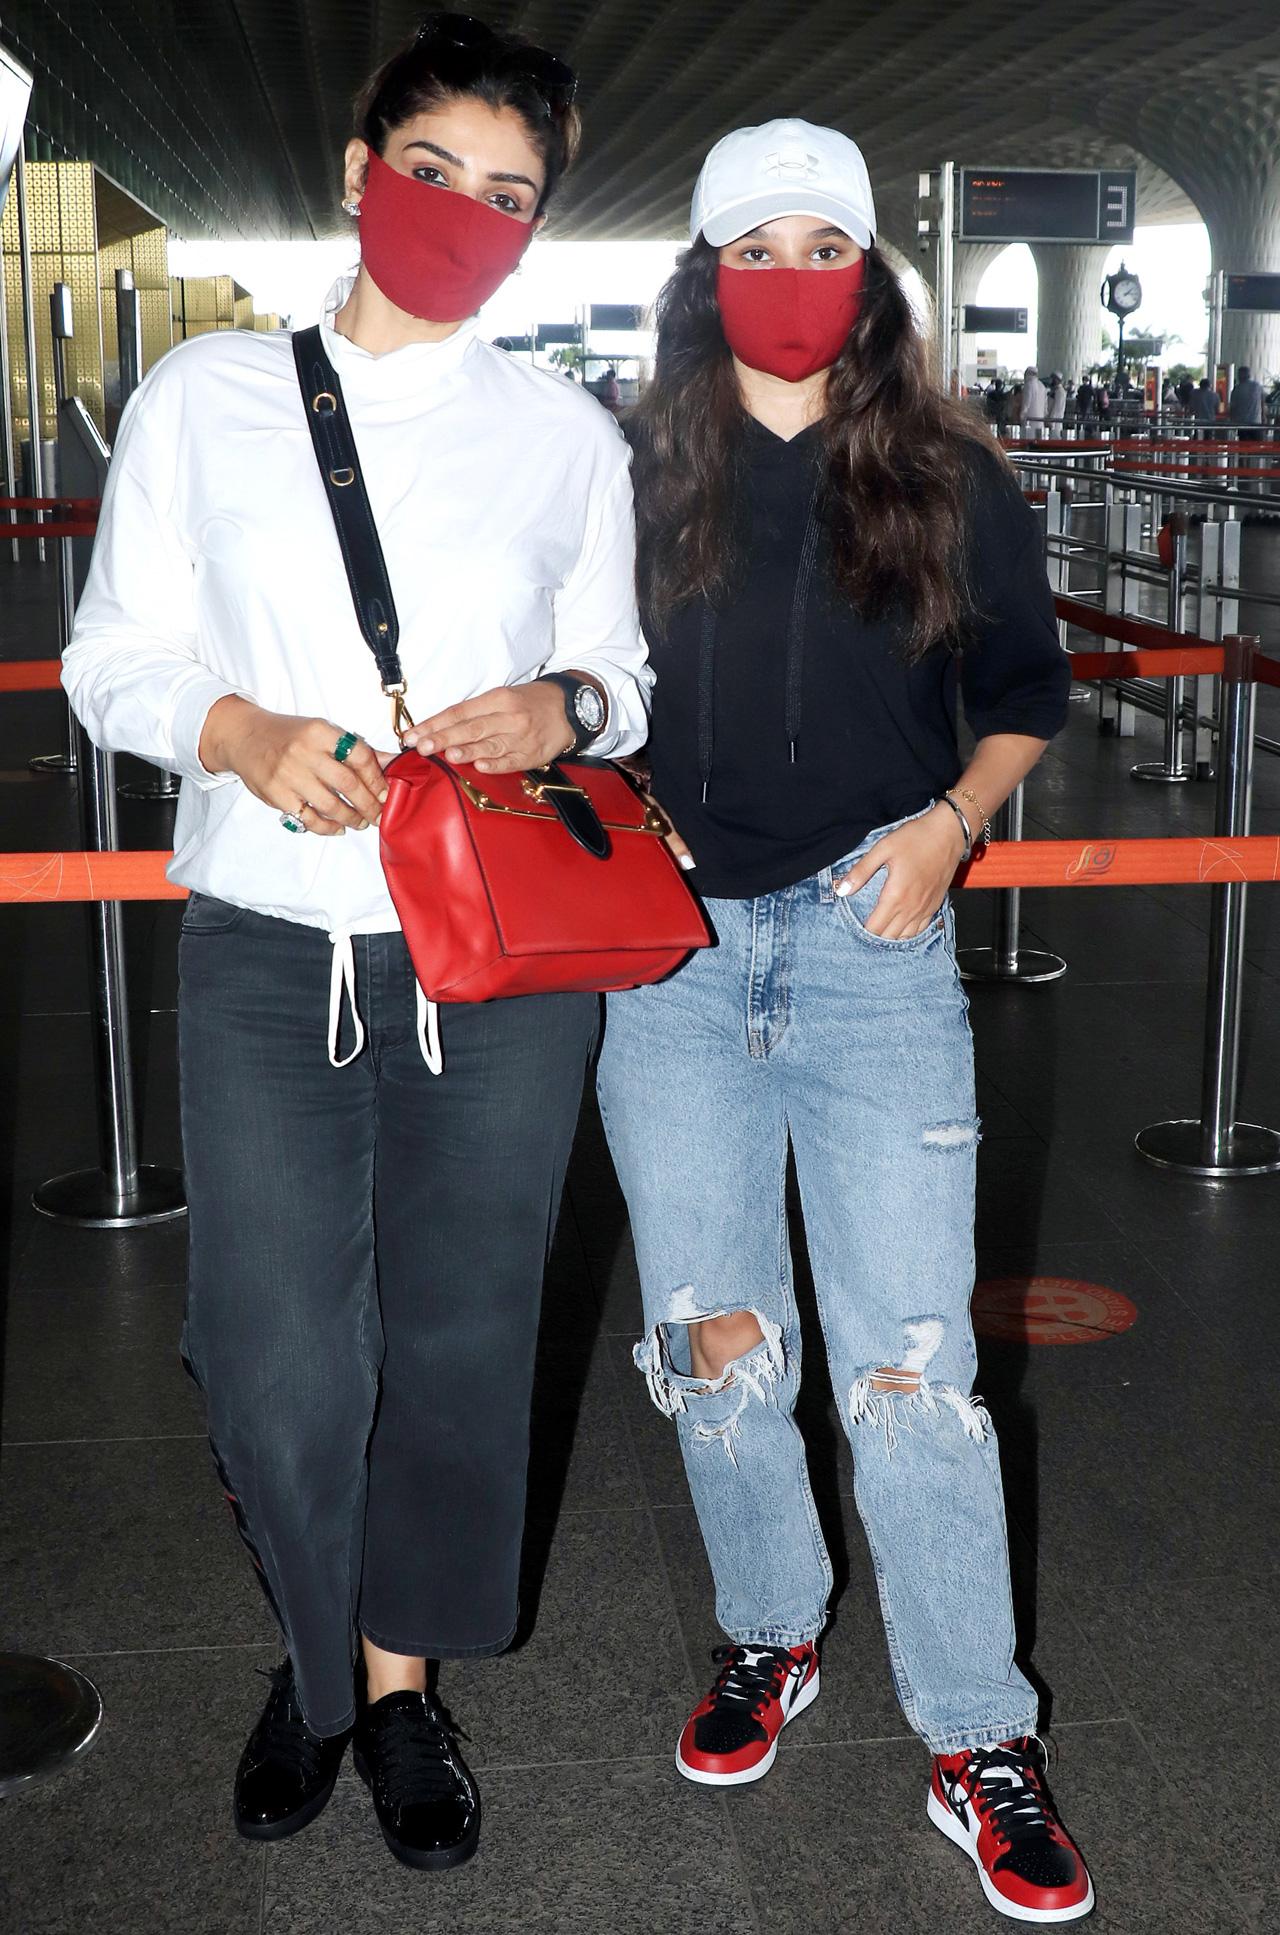 Raveena Tandon Thadani along with her family was also spotted at the Mumbai airport. Raveena seen posing with her daughter Rasha Thadani. She even shared pictures of her and Rasha on her Instagram and wrote, 